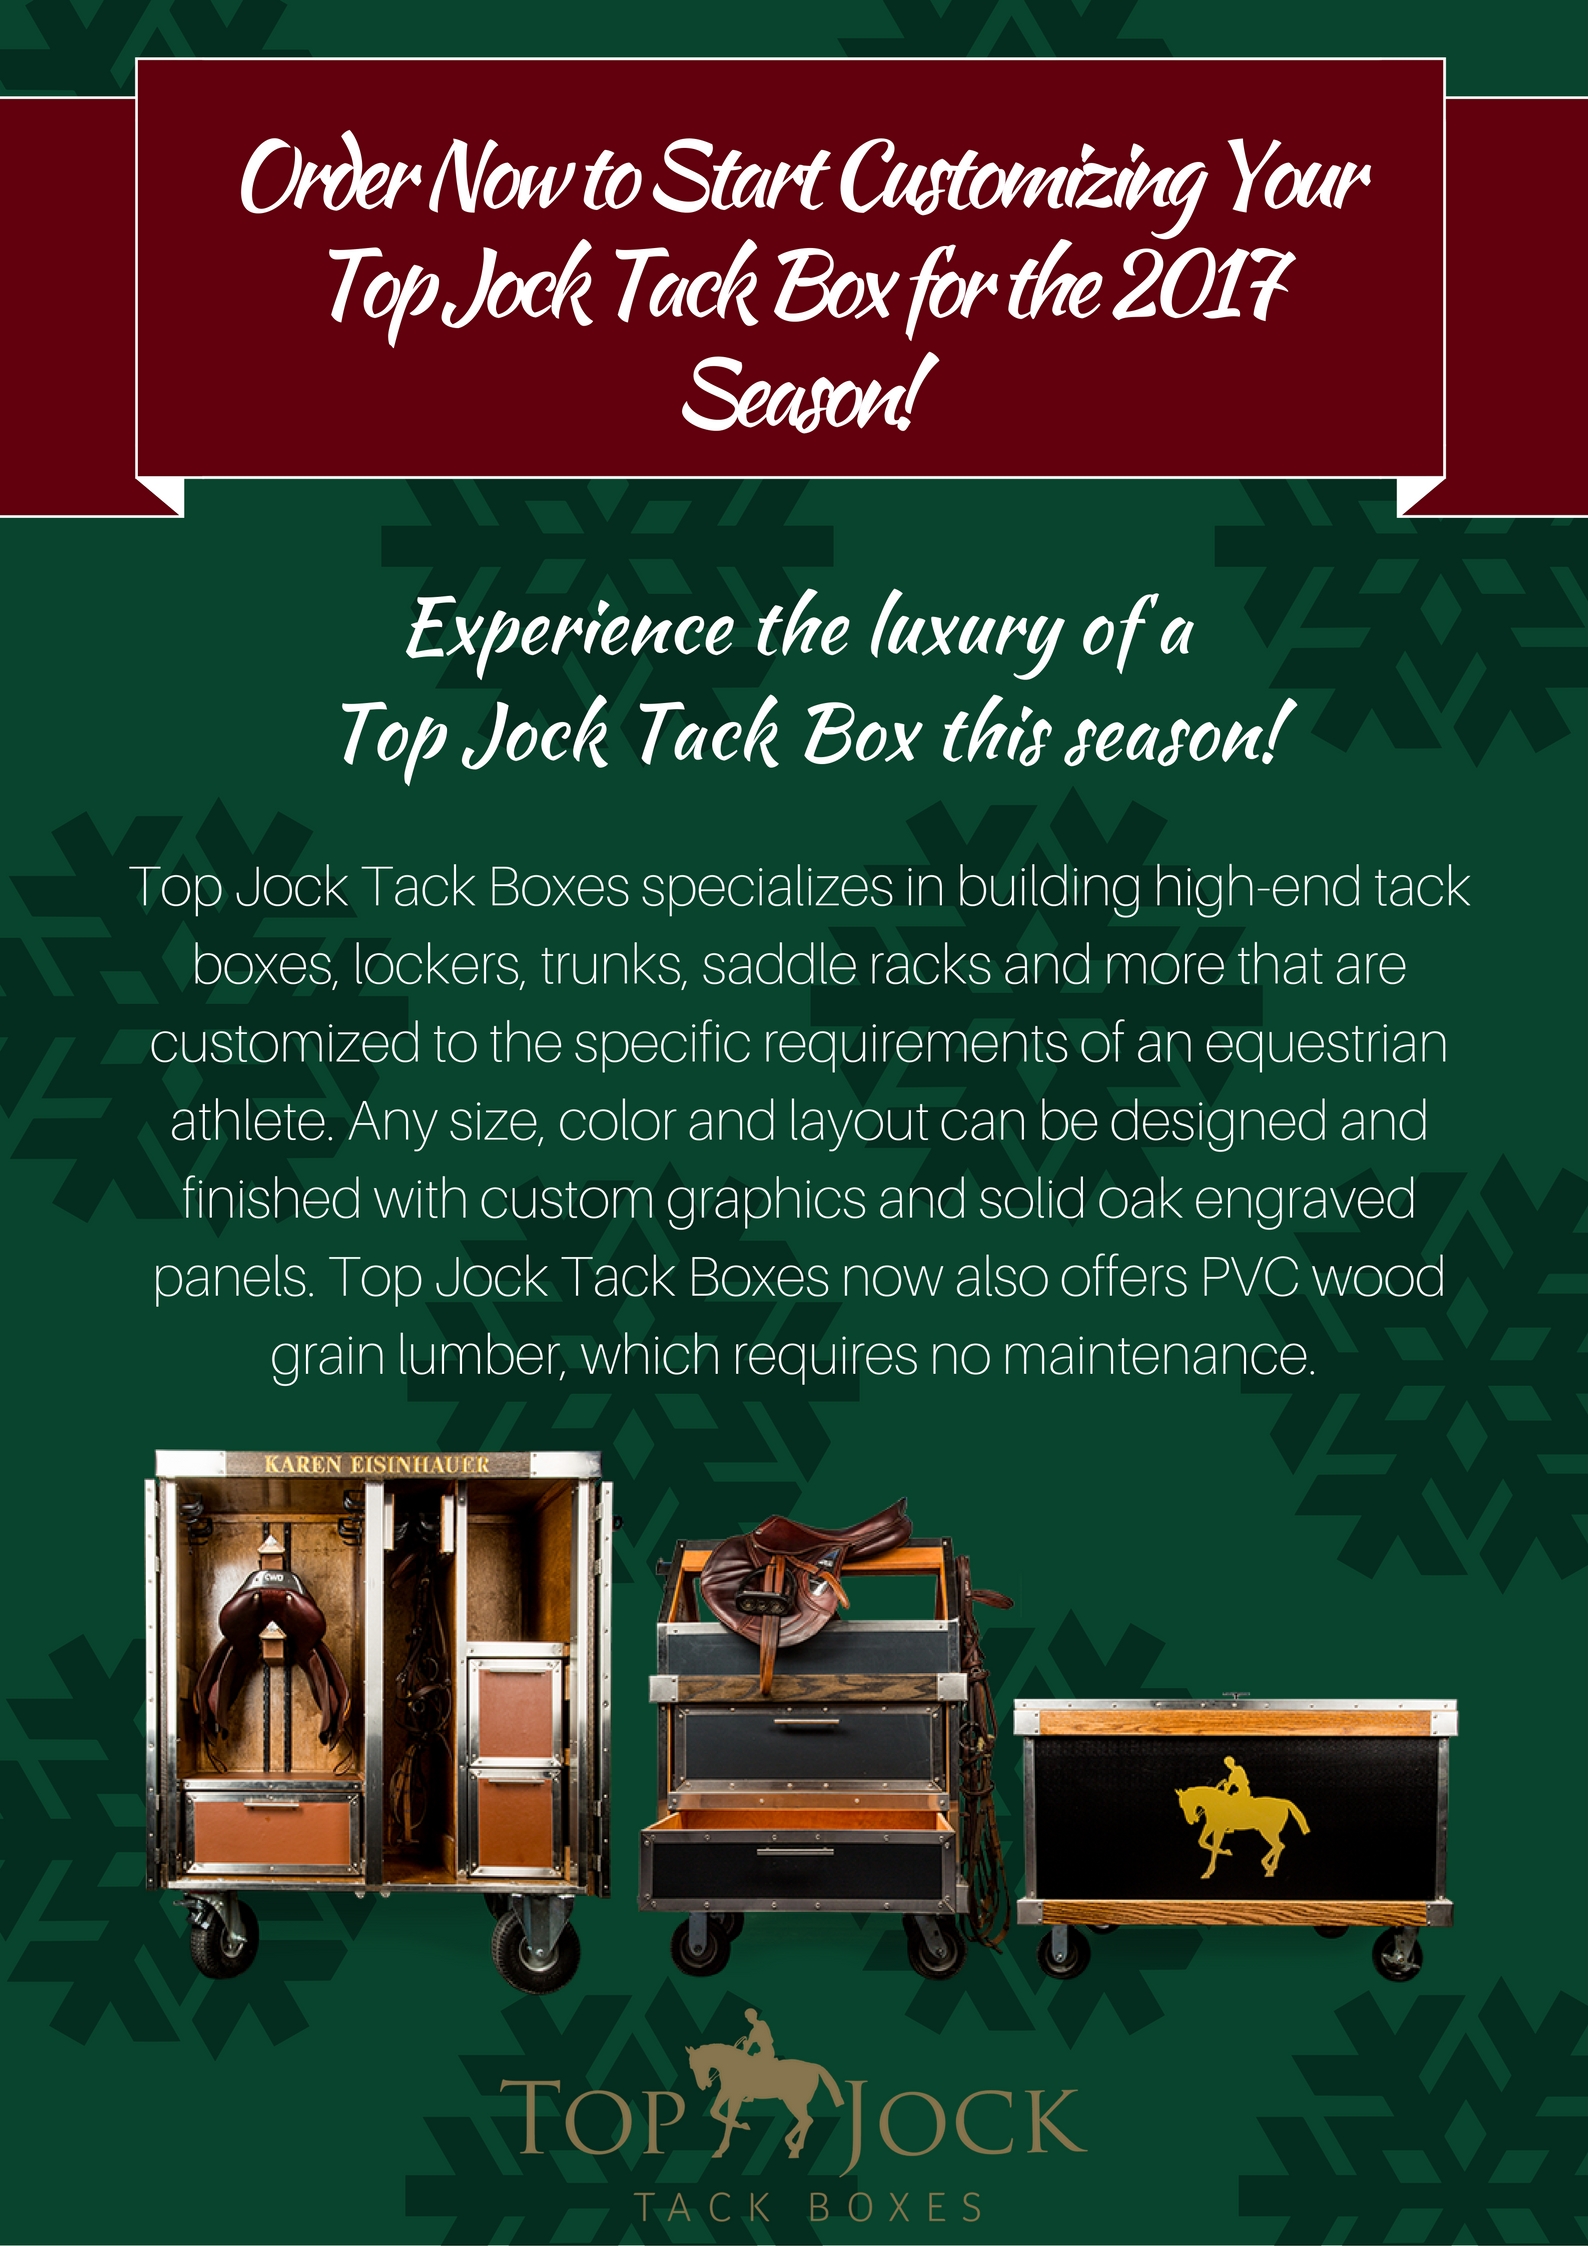 Order Now to Start Customizing Your Top Jock Tack Box for the 2017 Season!